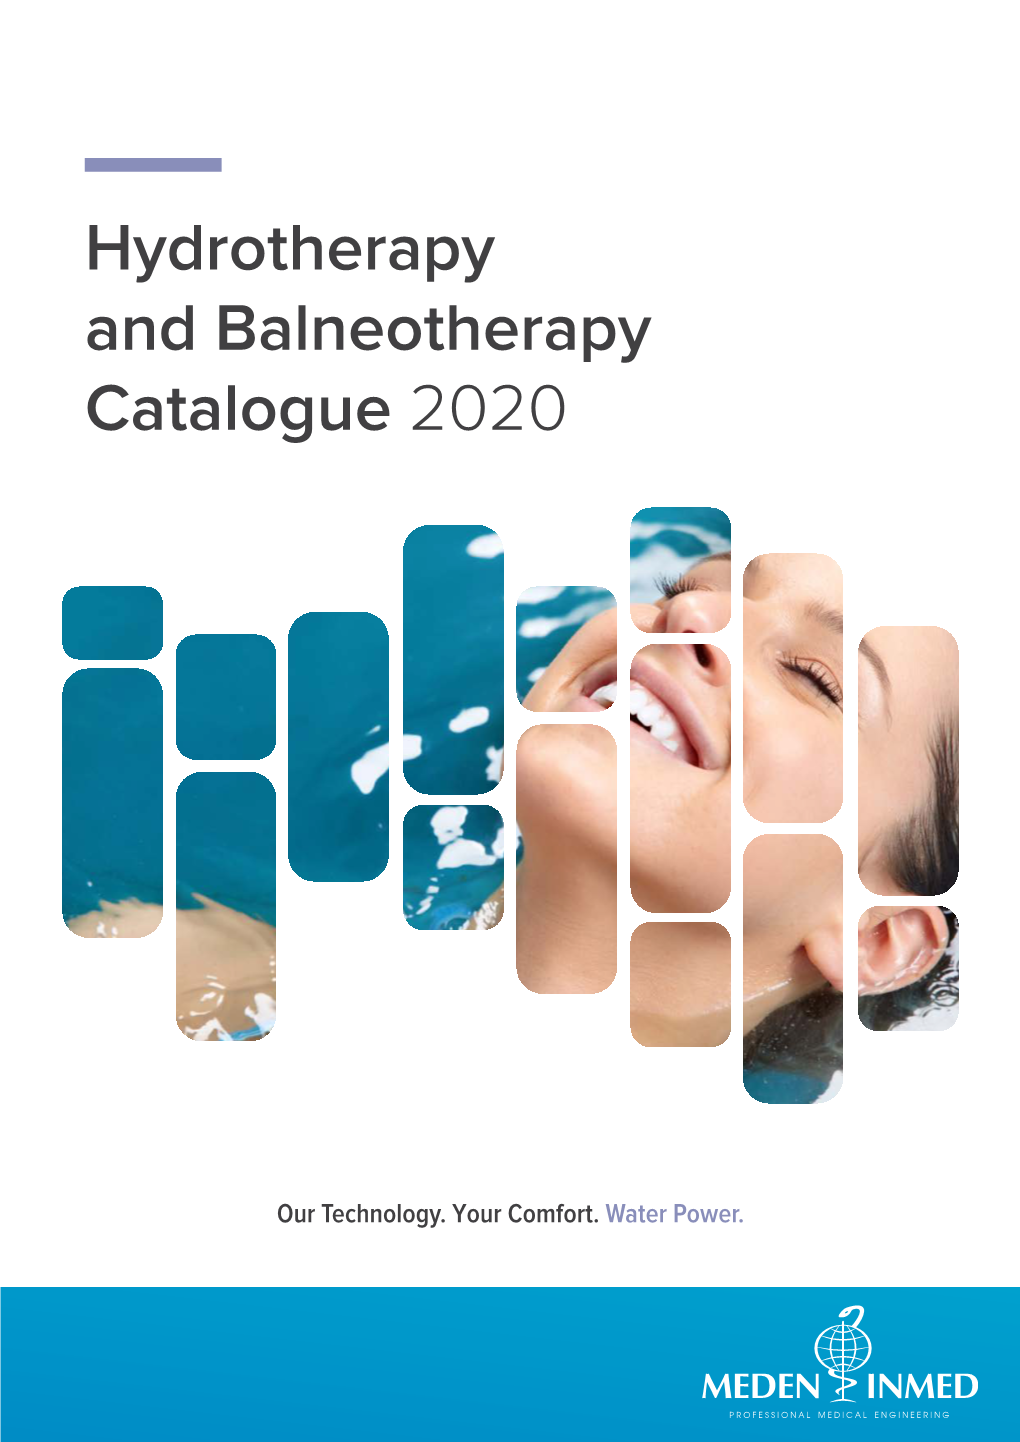 Hydrotherapy and Balneotherapy Catalogue 2020